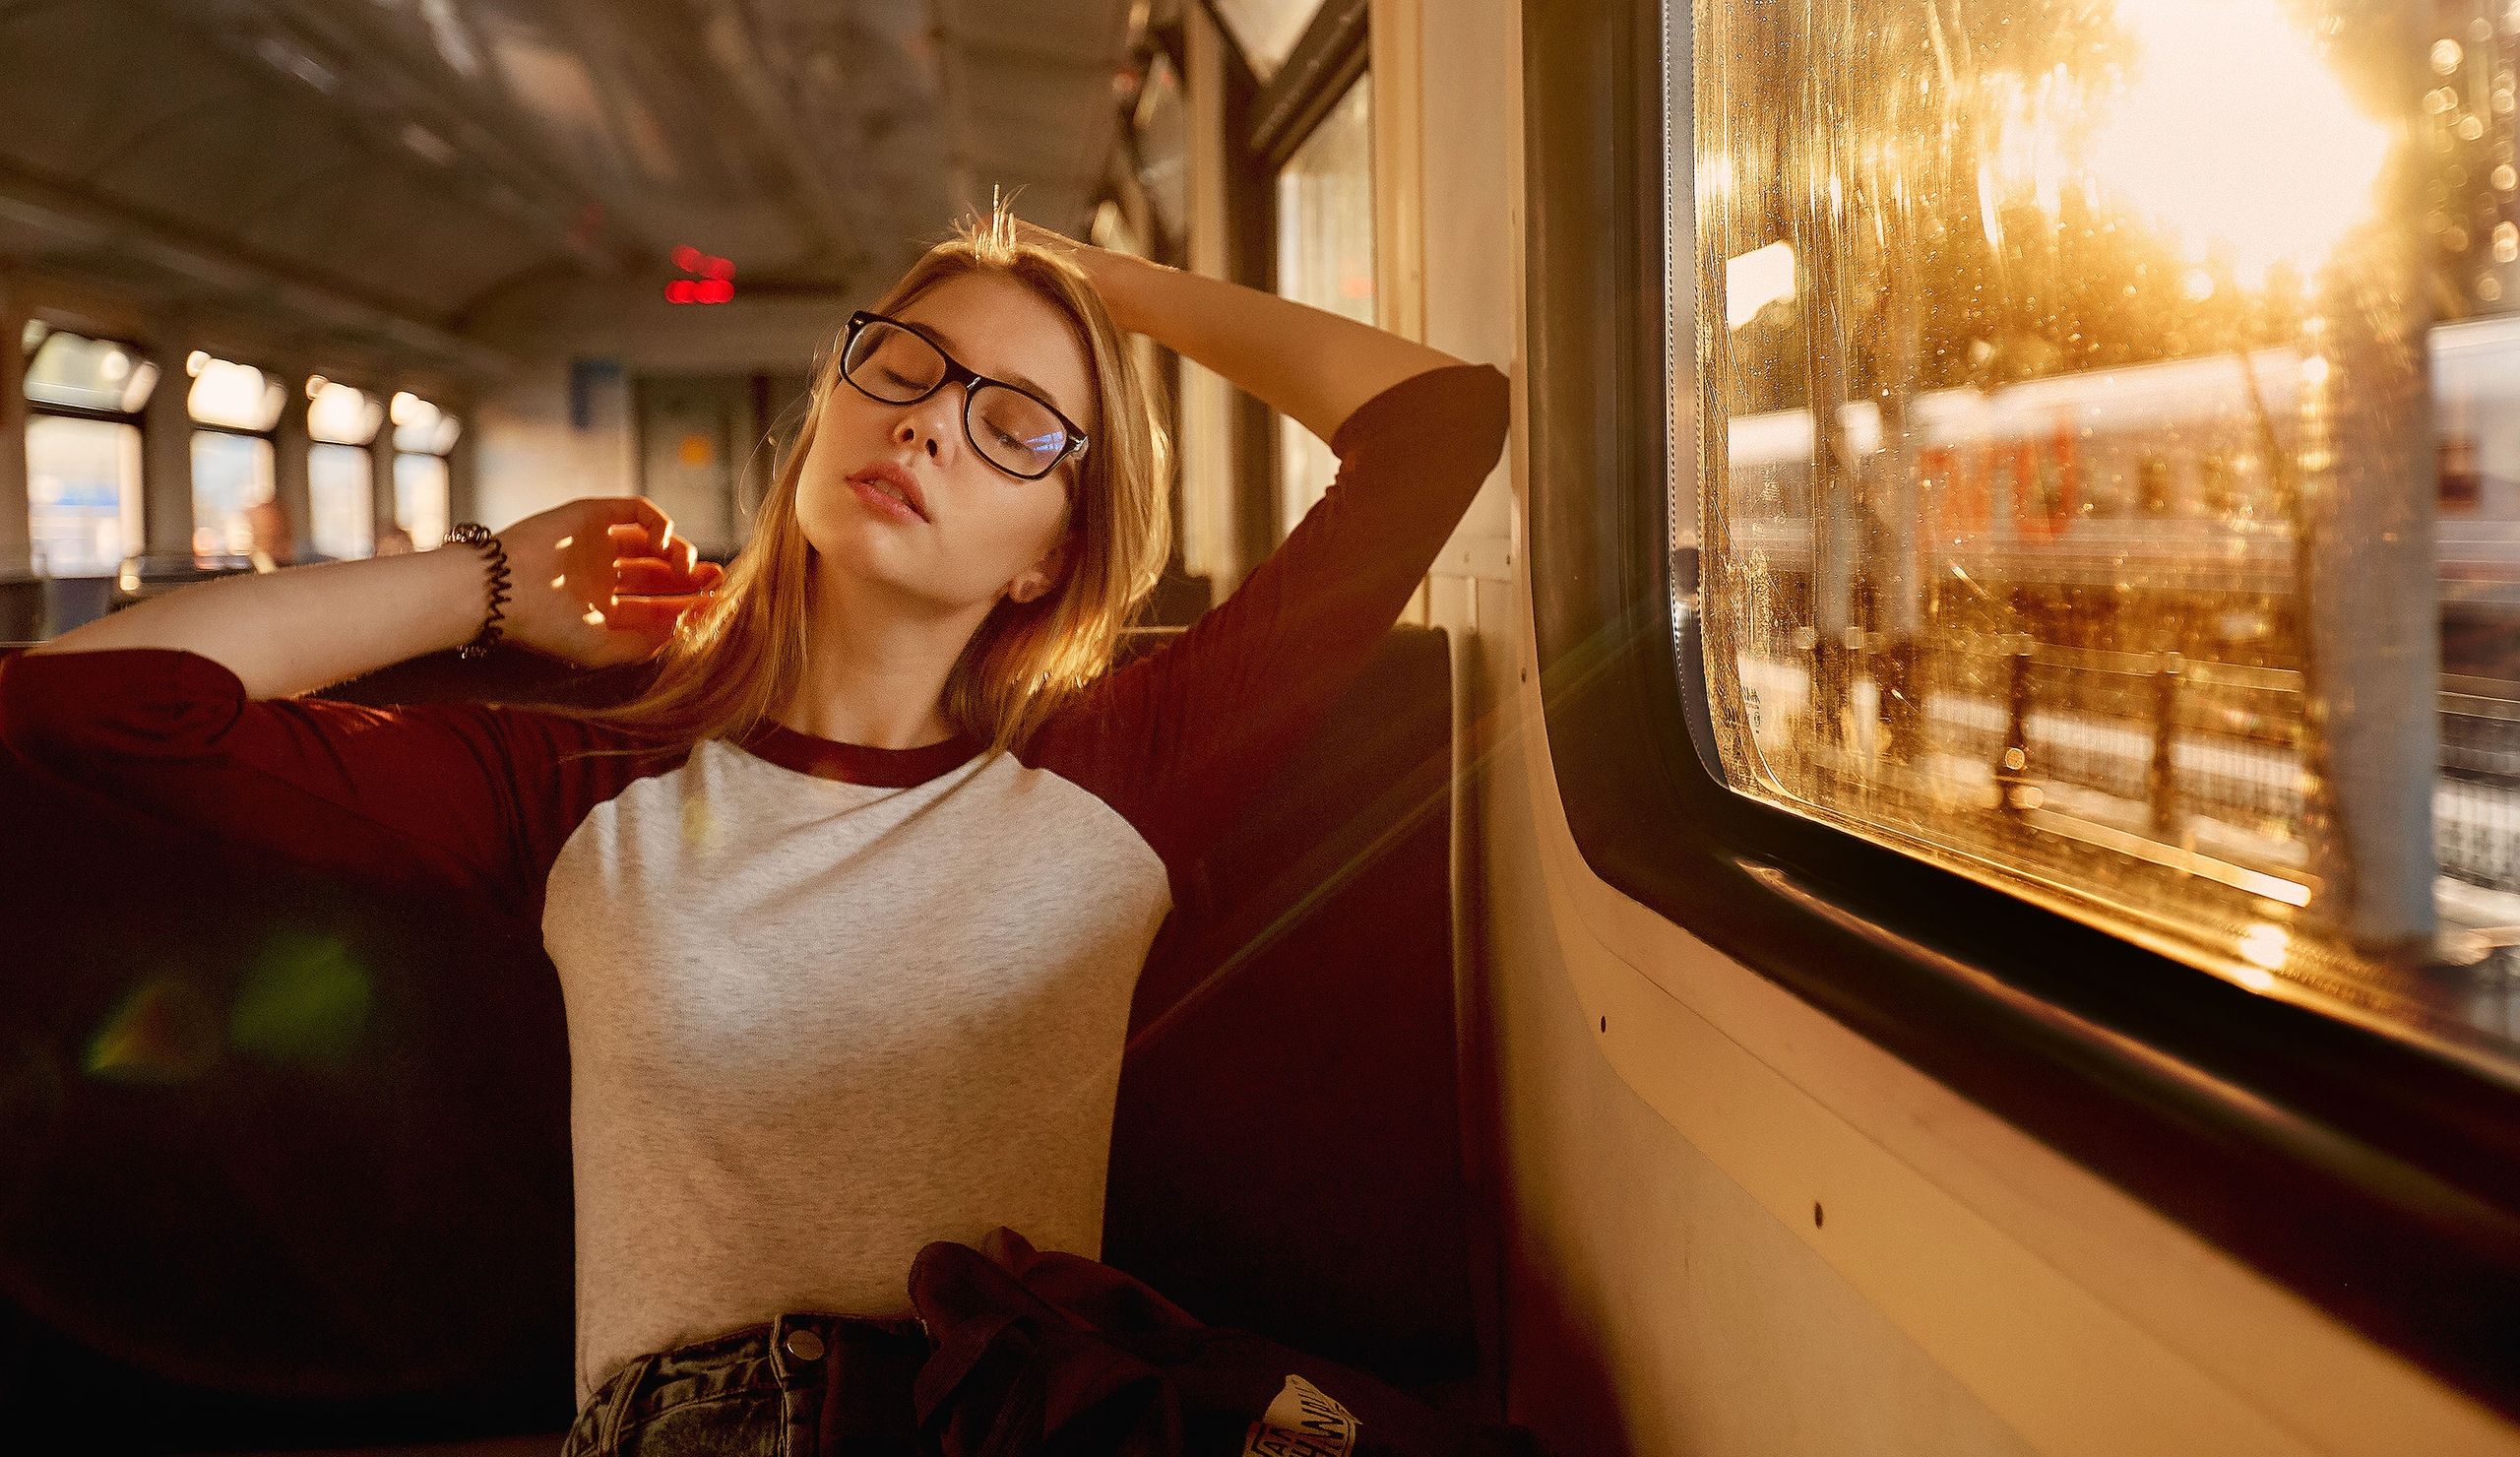 Women With Glasses Closed Eyes Sitting In Train 1280x1024 Resolution HD 4k Wallpaper, Image, Background, Photo and Picture